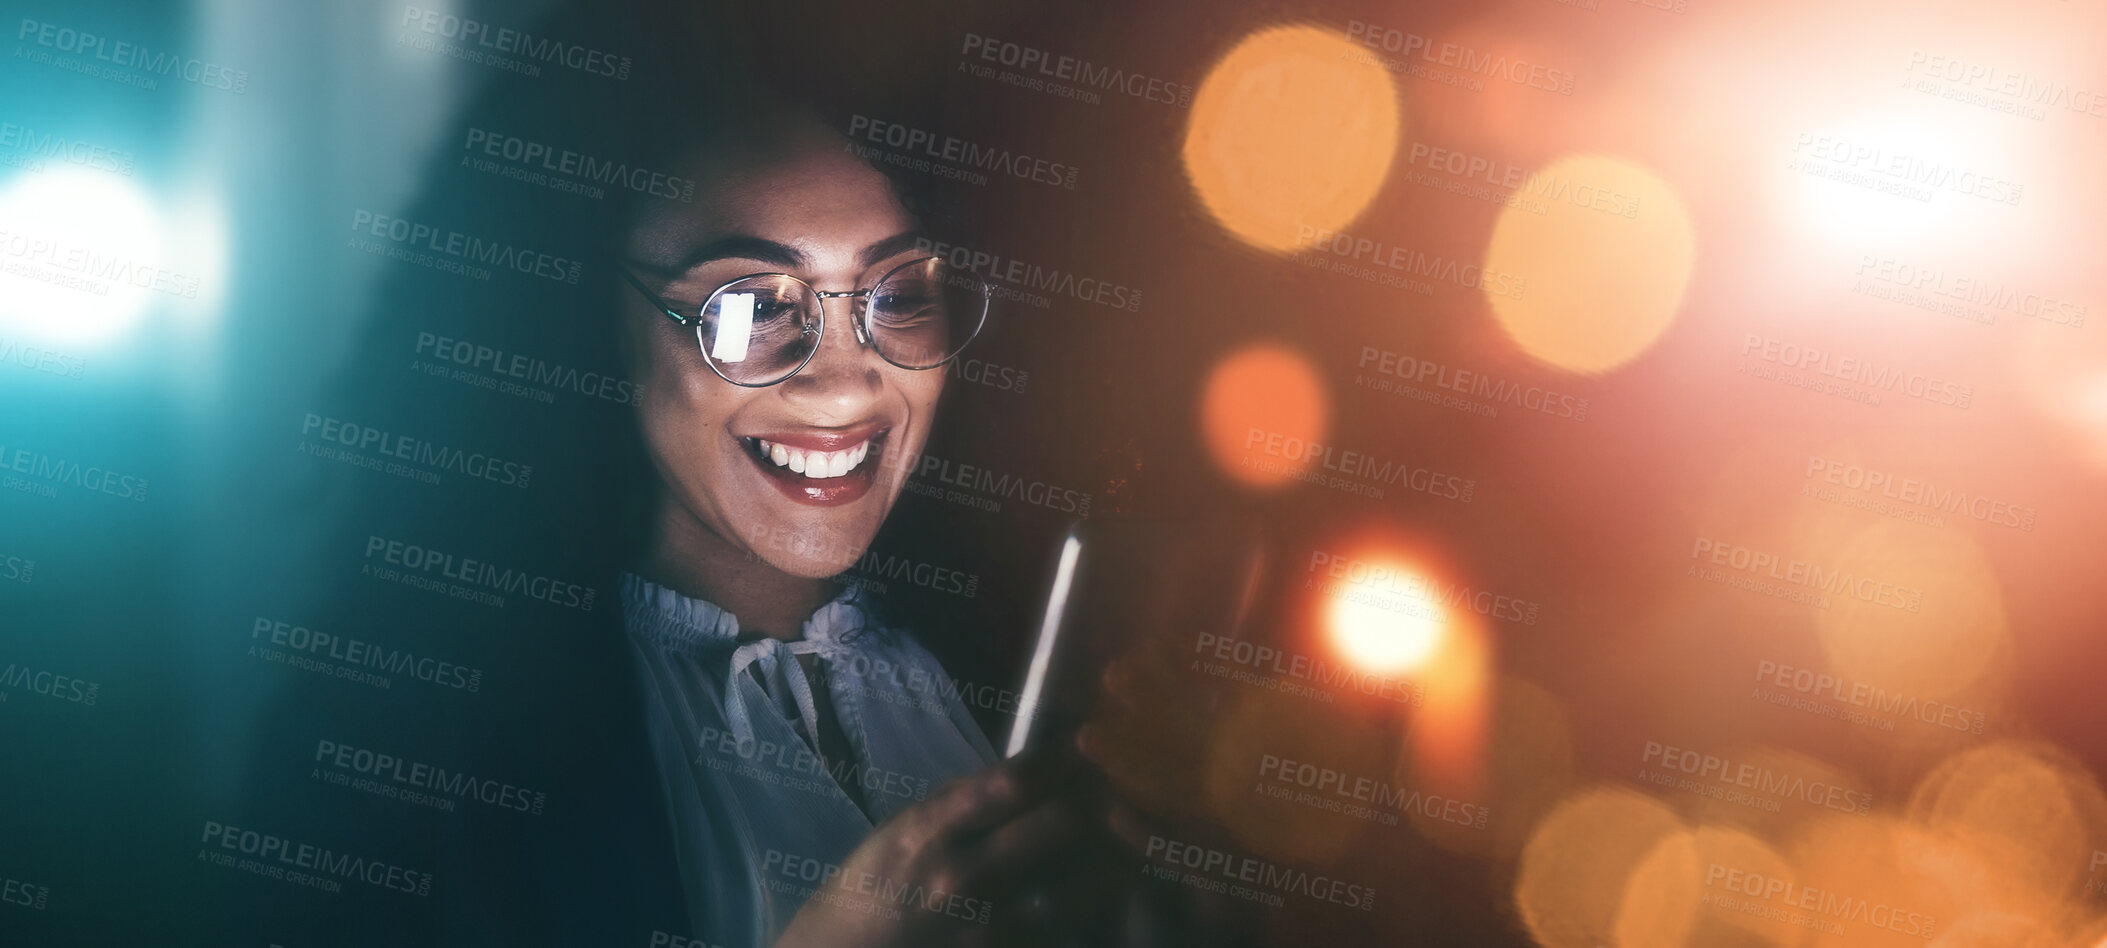 Buy stock photo Businesswoman, phone and smile in communication at night for texting, chatting or networking on dark background. Happy female employee holding smartphone working late for online planning strategy